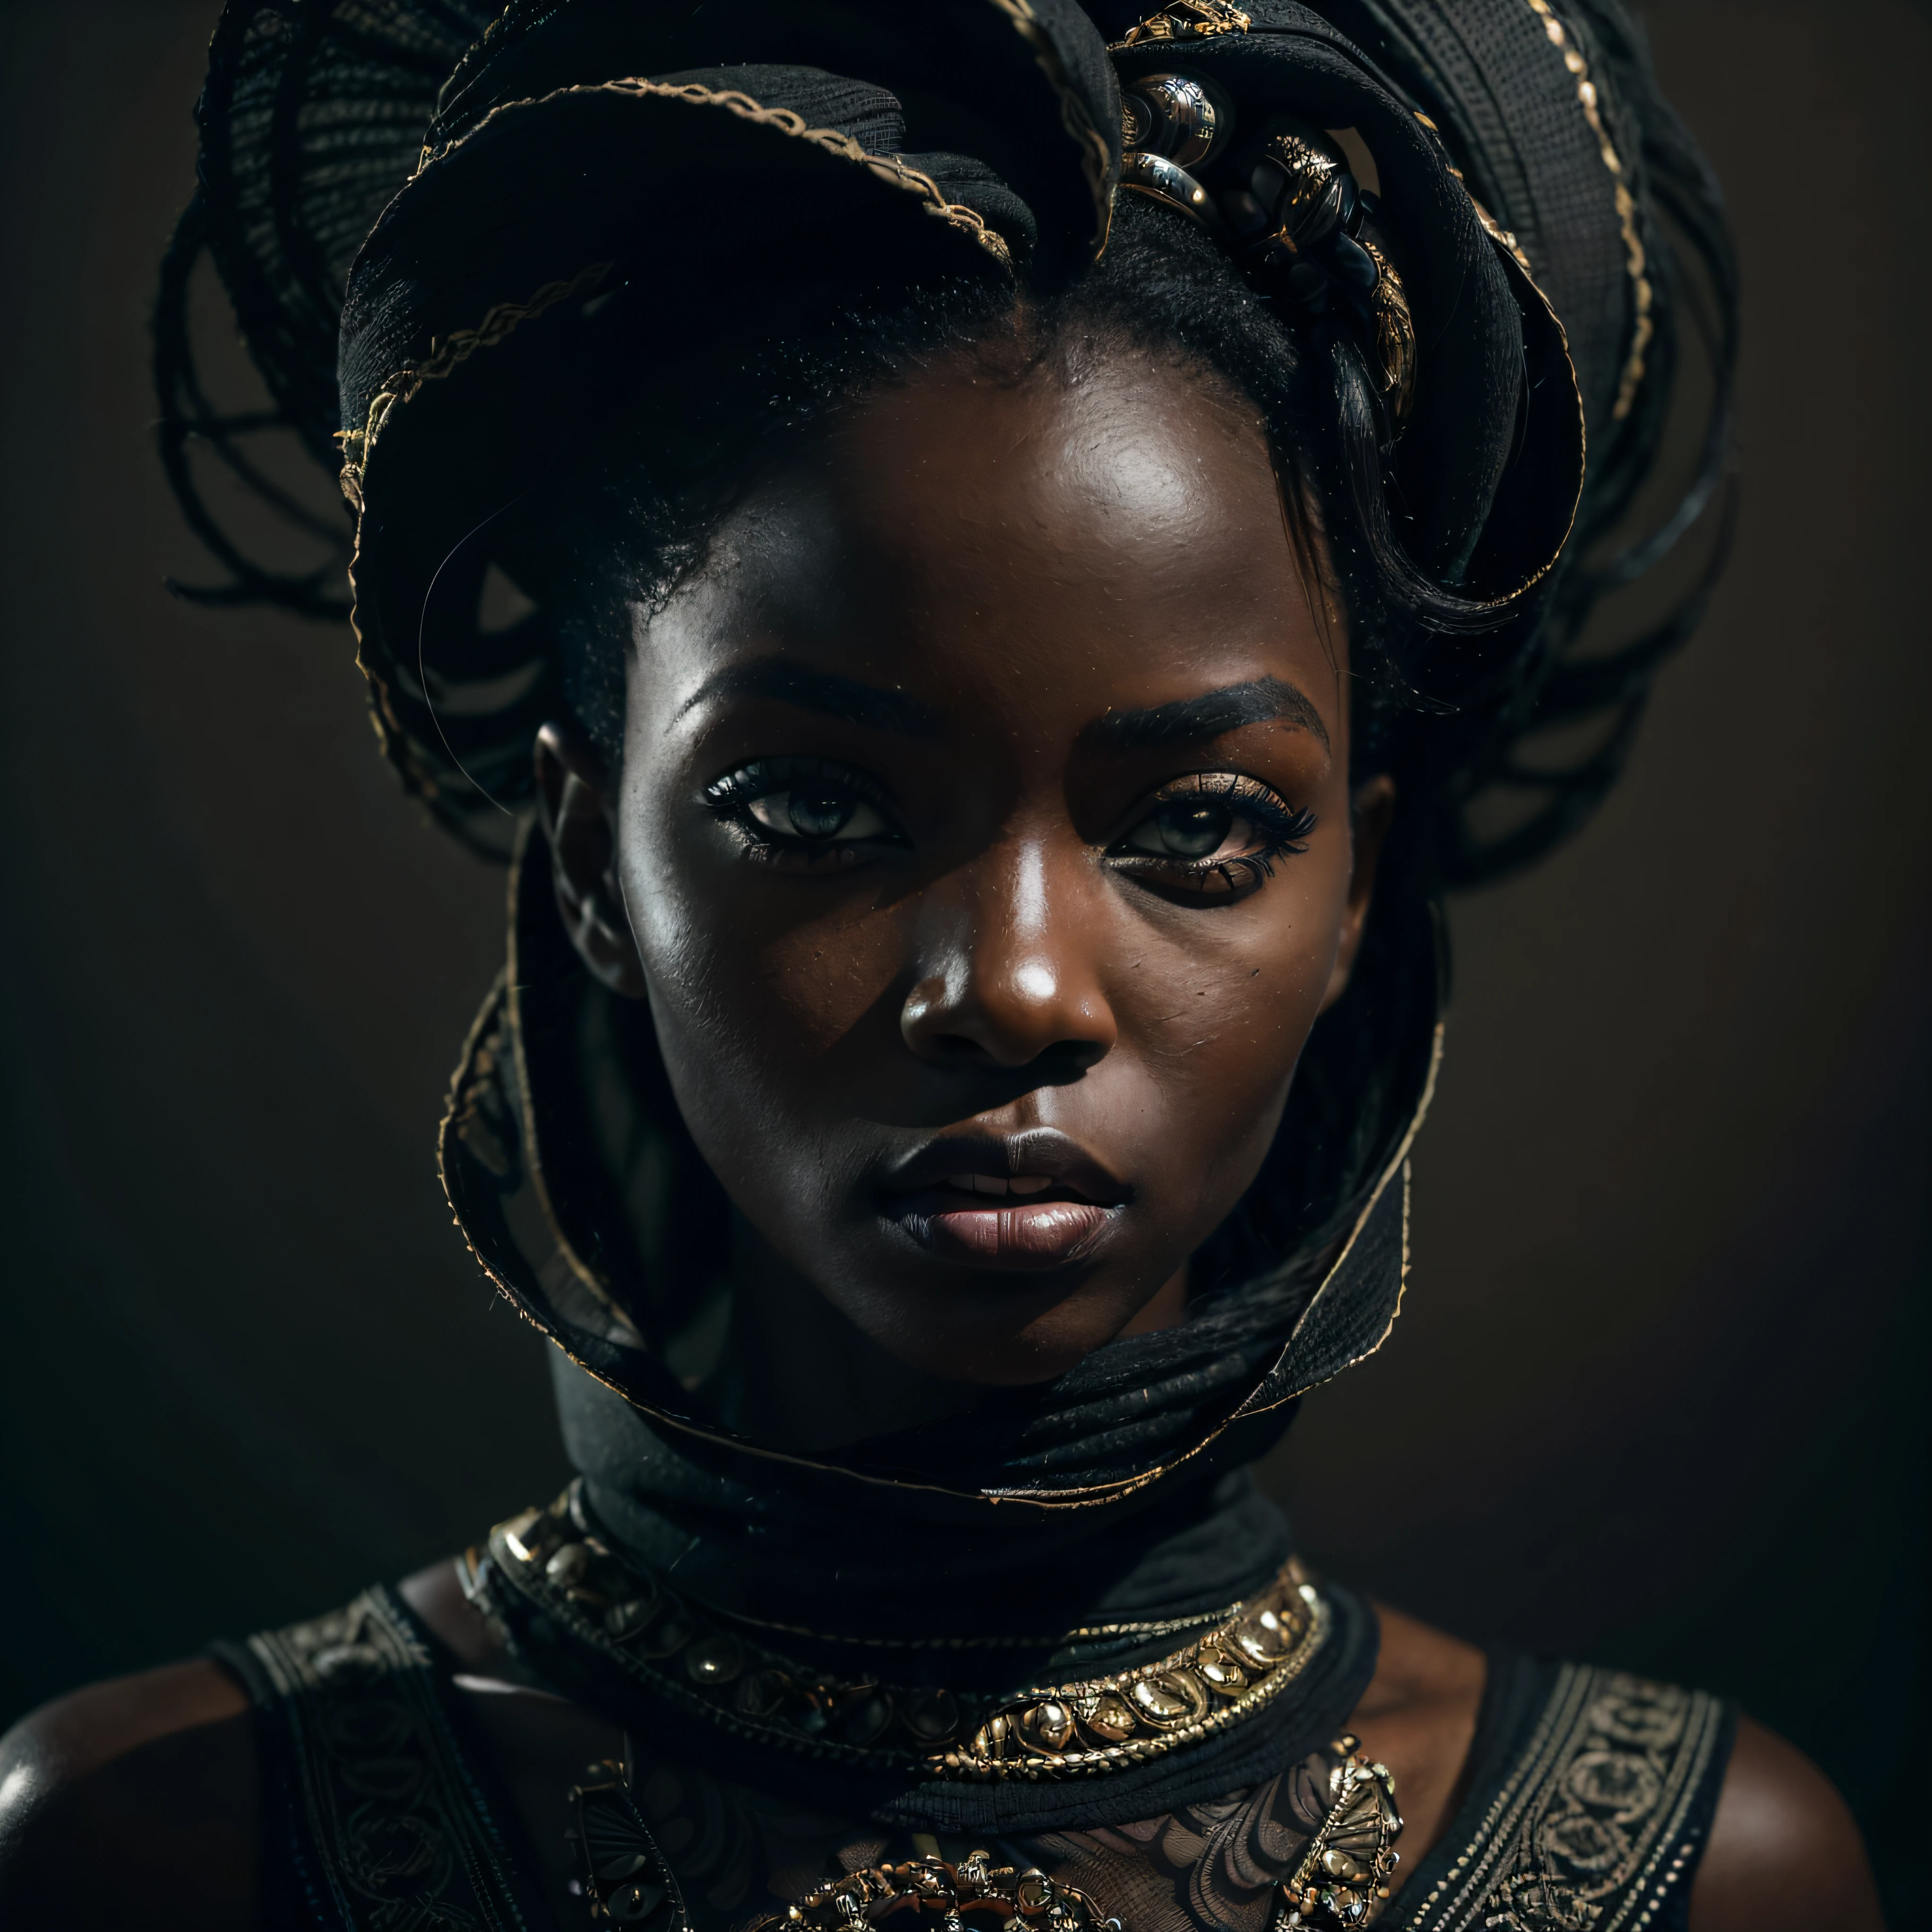 (portrait, dynamic), (expressive pose:1.6), (futuristic style), (A mystical portrait of a black Senegalese woman:1.3), (charcoal black skin tone:1.3), (authentic authority in her eyes: 1.2), wearing dark mascara, the photograph captured in stunning 8k resolution and raw format to preserve the highest quality of details. she wears elegant futuristic clothes, (small breasts:1.3), (her eyes are portrayed with meticulous attention to detail: 1.3), The photograph is taken with a lens that emphasizes the depth in her eyes, (wind billows around her), and the backdrop is a dark studio setting that enhances the colours of the scene. The lighting and shadows are expertly crafted to bring out the richness of her skin tone and the intense atmosphere. Her creative hair adds a touch of contrast against her skin, The overall composition captures her essence with authenticity and grace, creating a portrait that celebrates her heritage and beauty. Photography utilizing the best techniques for shadow and lighting, to create a mesmerizing portrayal that transcends the visual, slightly tilted head,